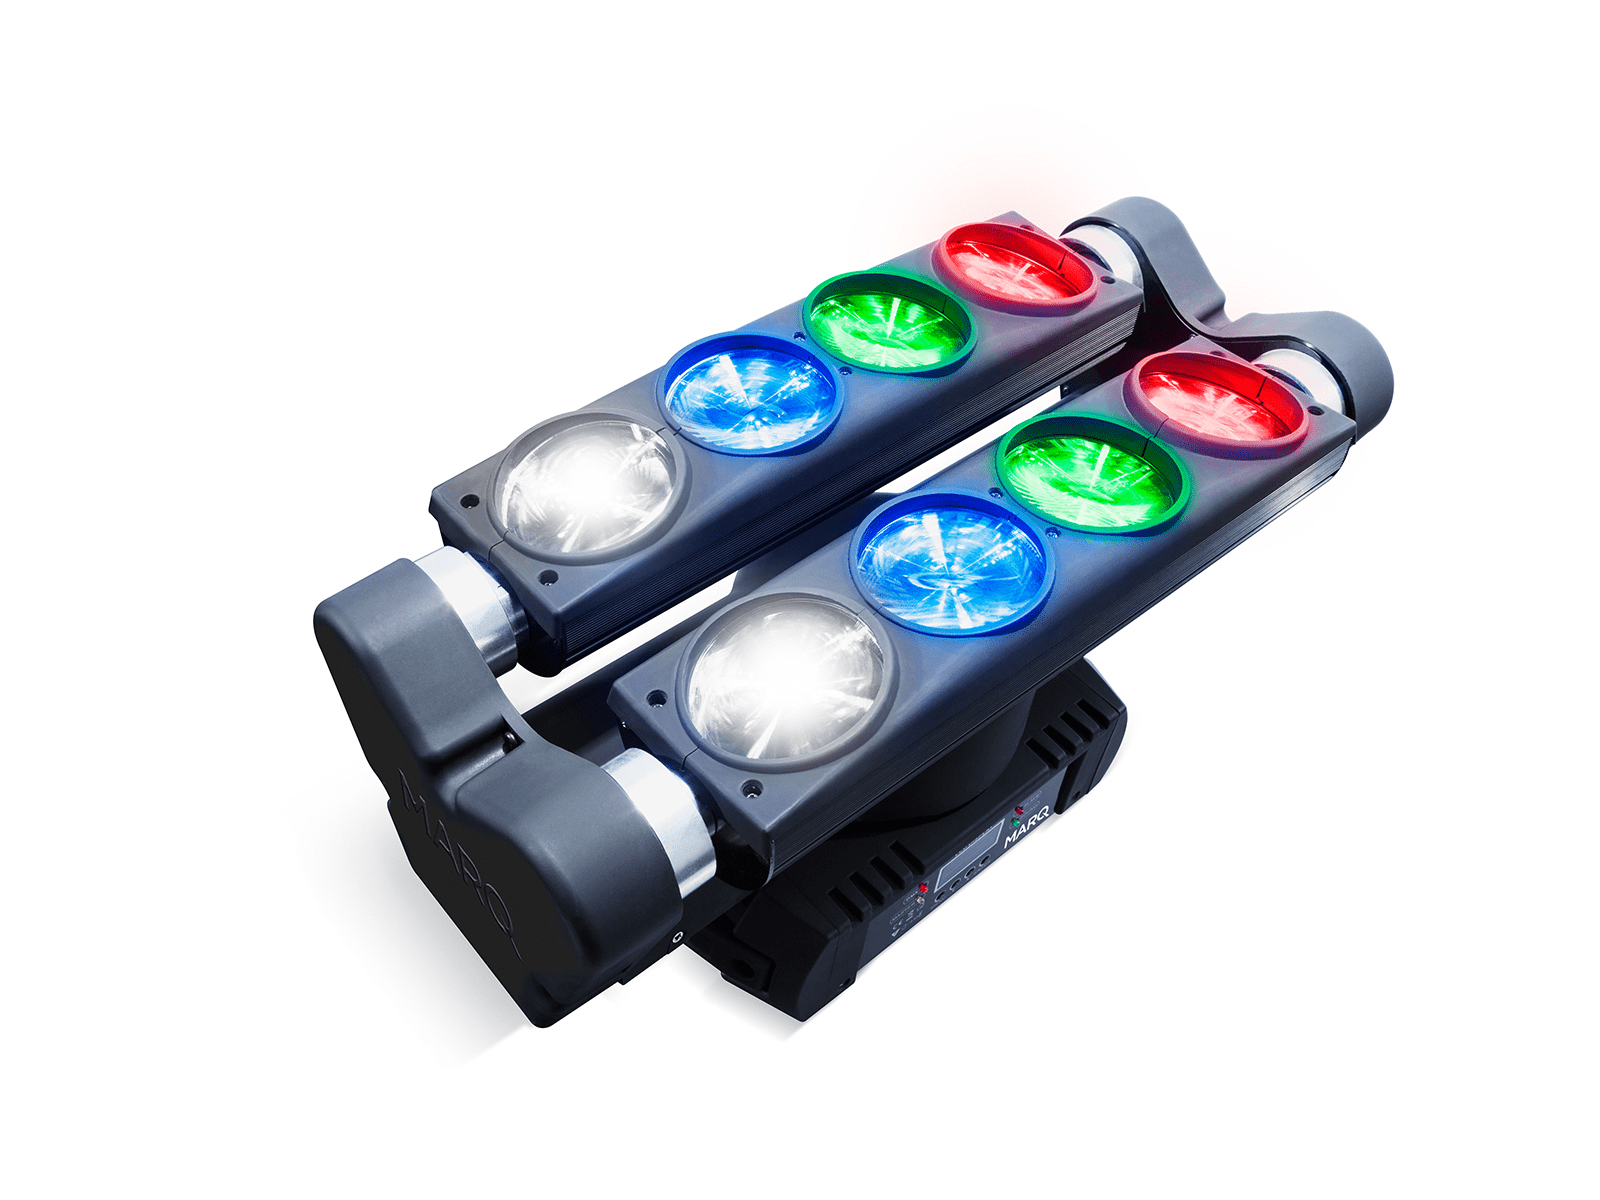 Marq Lighting Ray Tracer X Quad Spare Parts